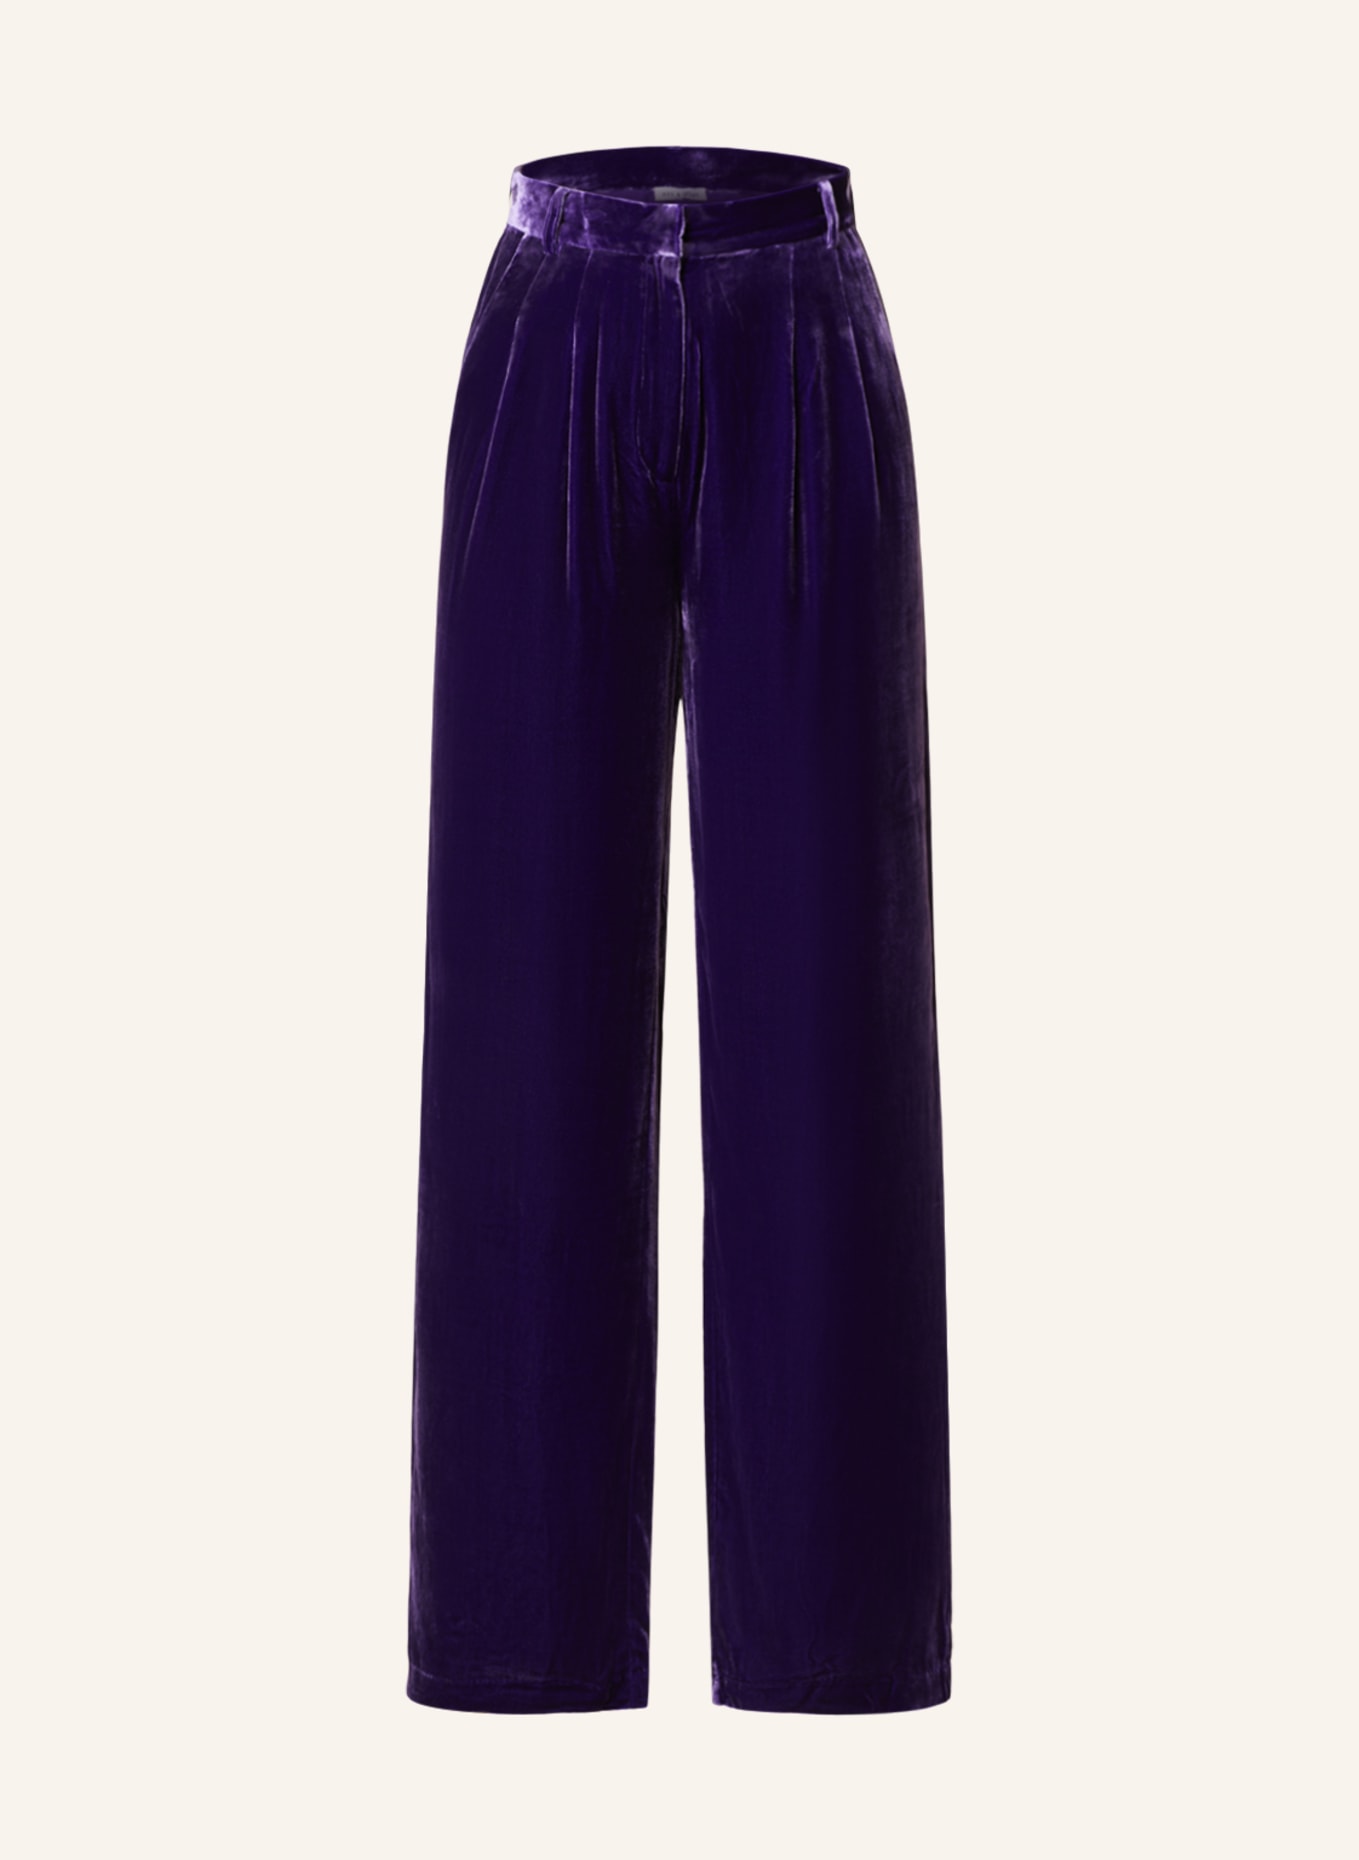 Women's Wide Leg Velvet Pants High Waist Solid Color Flare Bell Bottom Pants  Casual Comfy Work Lounge Trousers - Walmart.ca